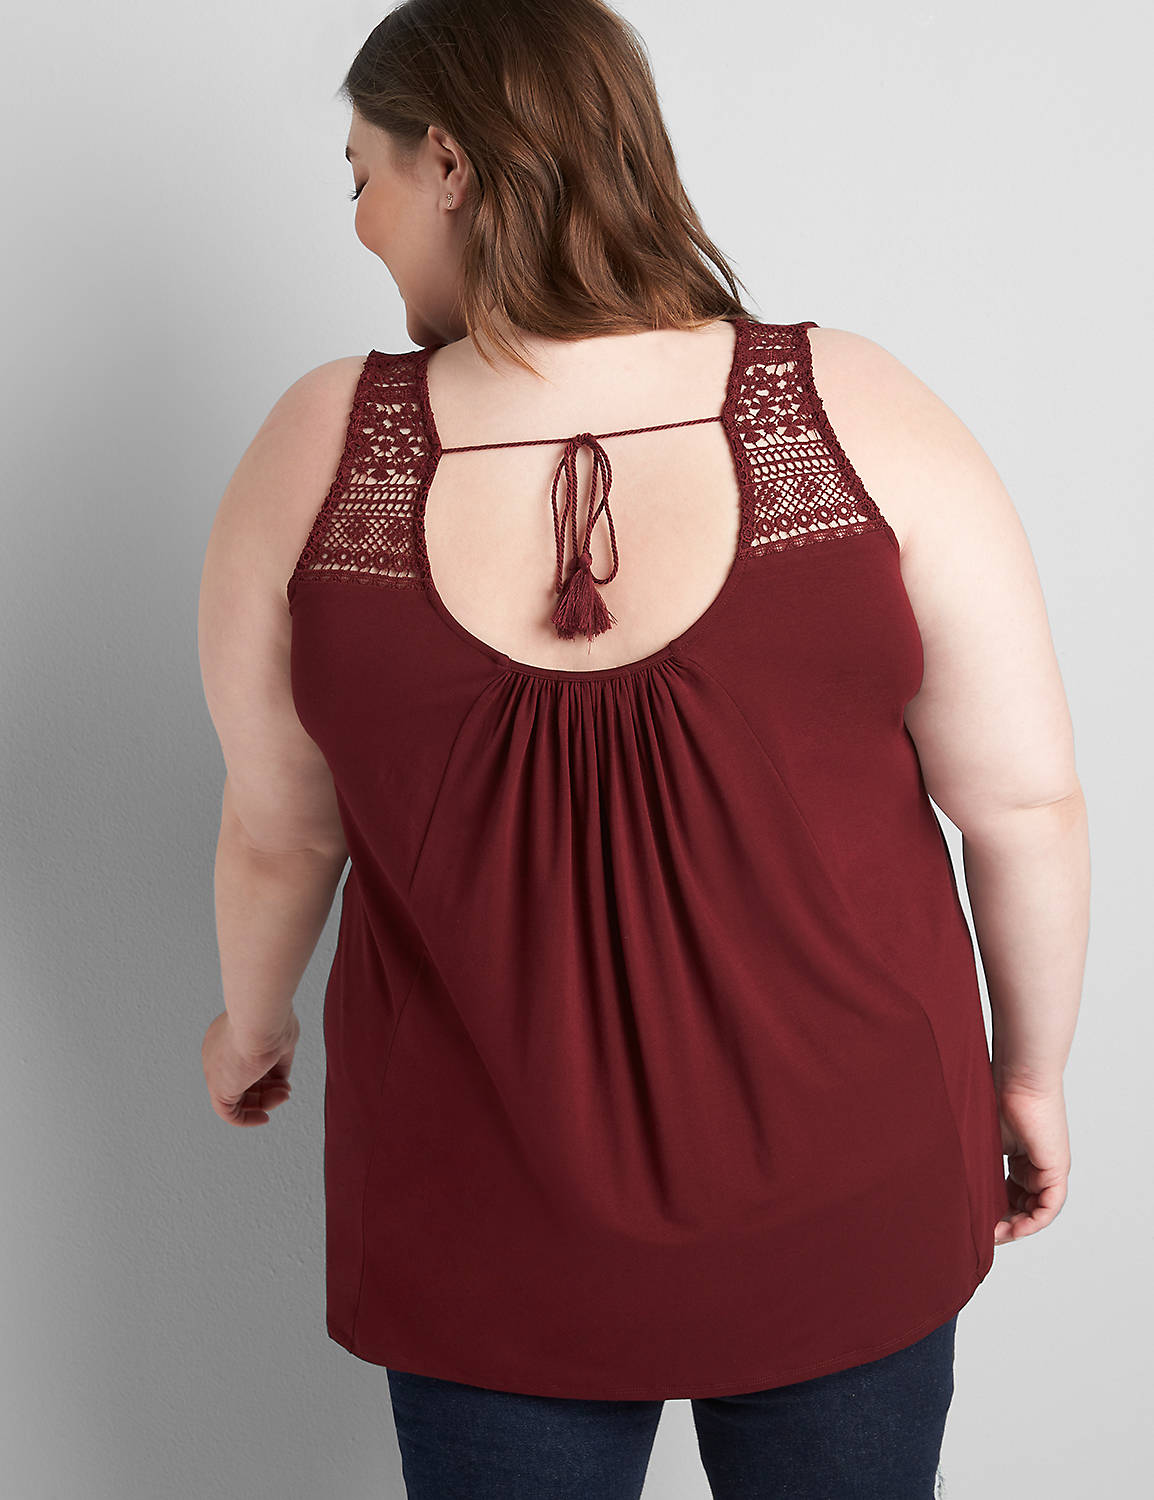 Crew-Neck Swing Tank With Lace Overlay Product Image 2